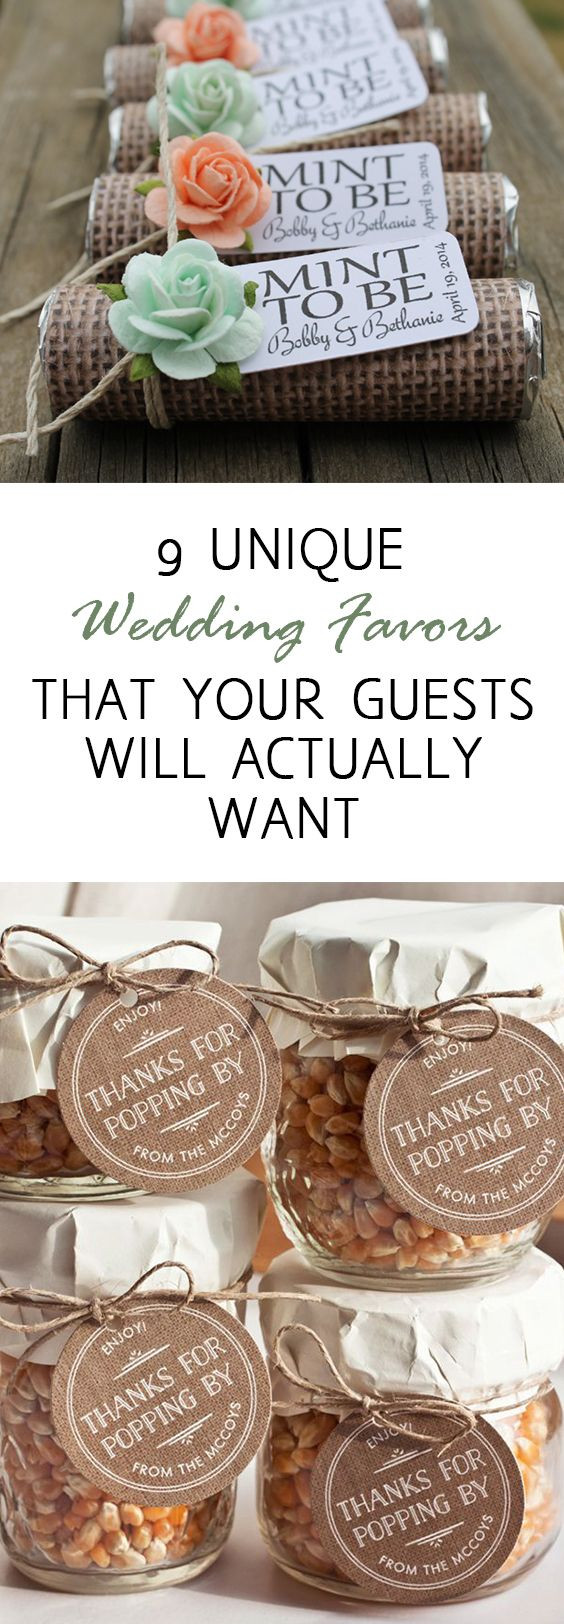 Diy Wedding Favor Ideas
 9 Unique Wedding Favors that Your Guests Will Actually